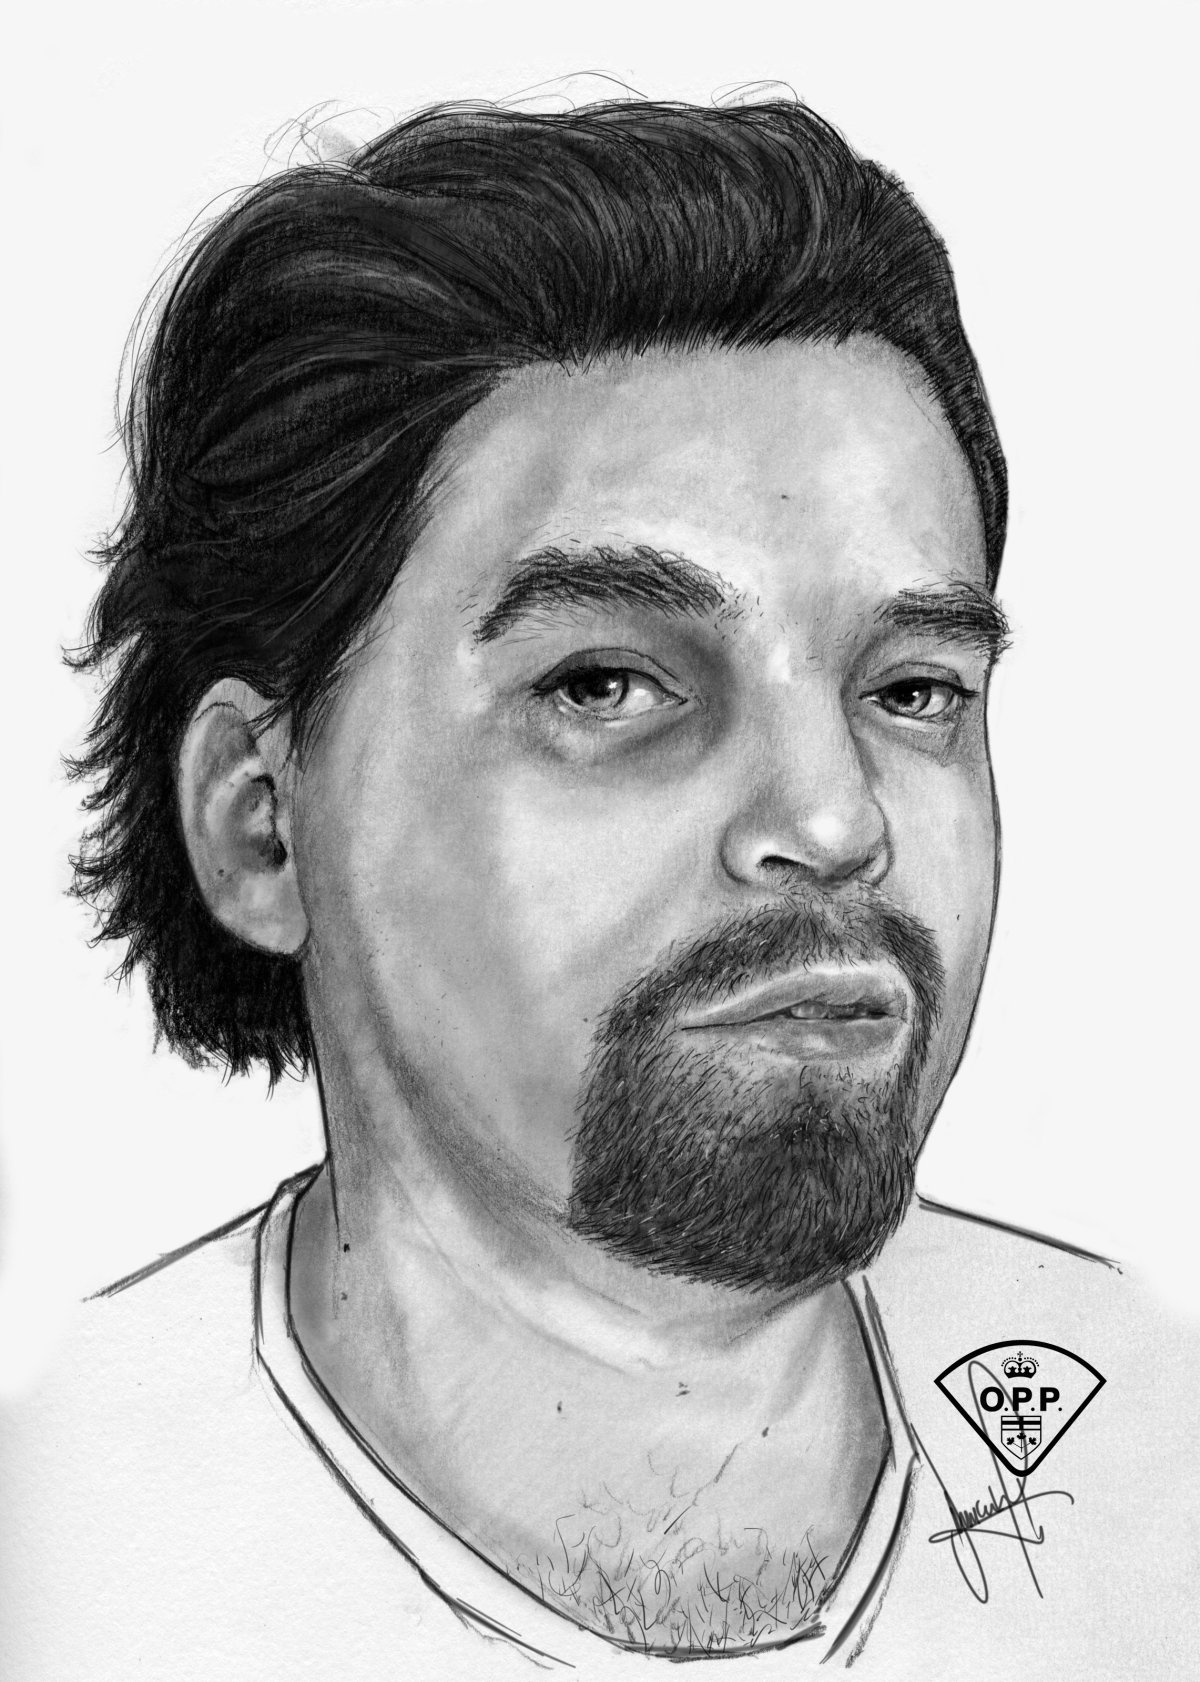 OPP in Ottawa are circulating this forensic sketch of a man who died after being found seriously injured on Highway 417 on Aug. 12, in hopes the public can help them identify him. The man died of his injuries in hospital, provincial police said.